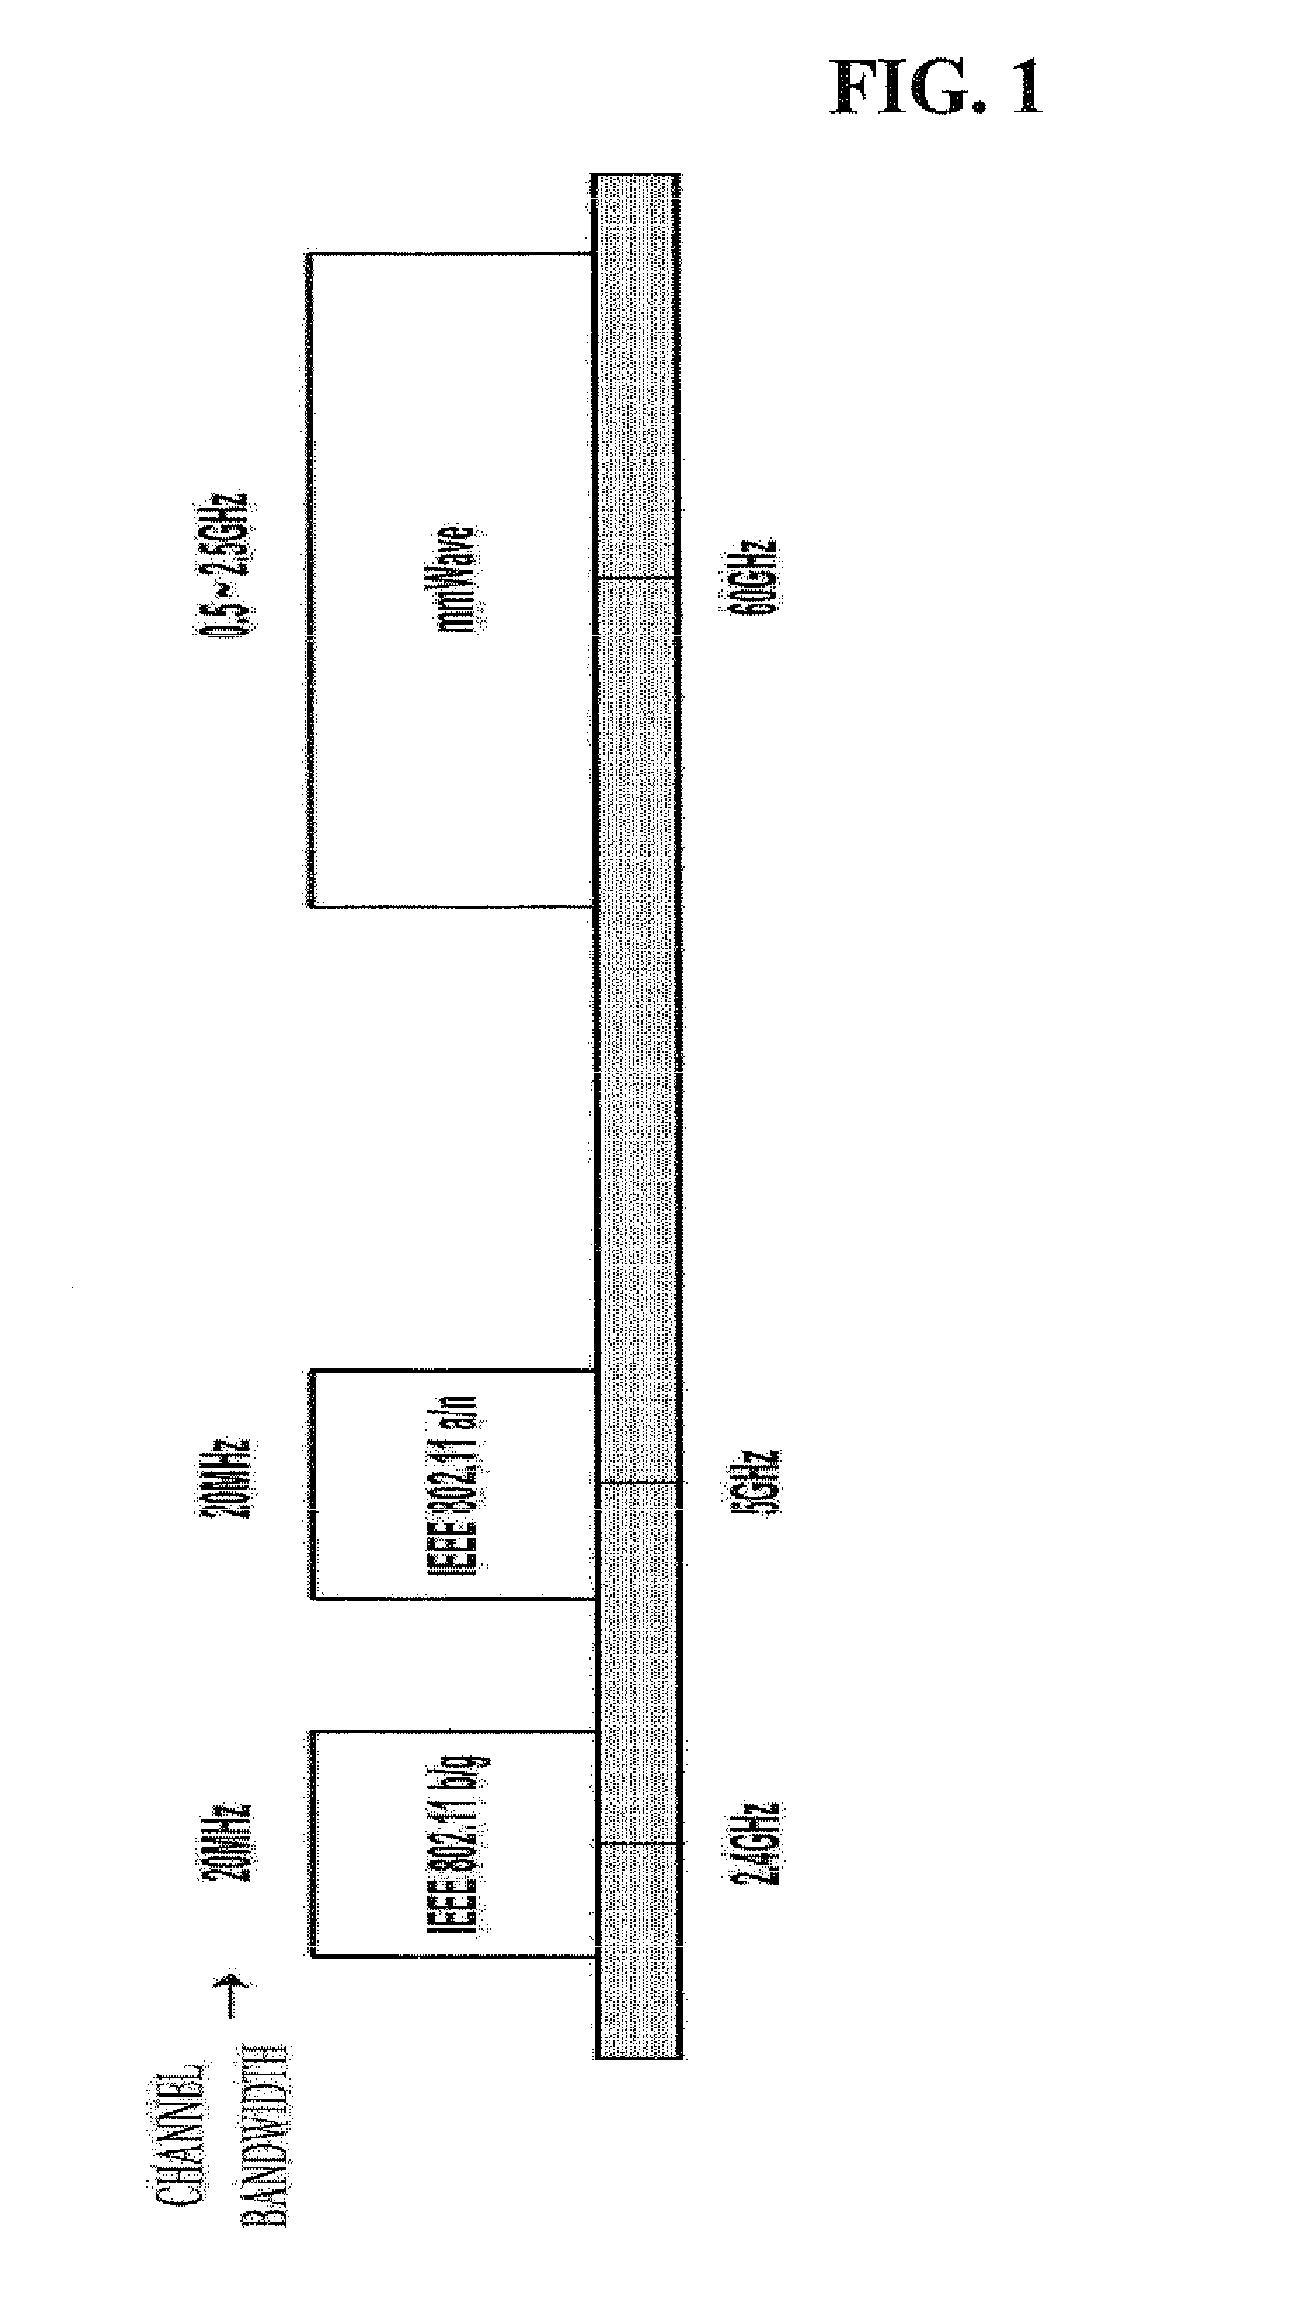 Channel allocation management method for transferring asynchronous data, asynchronous data transferring method, and apparatus thereof